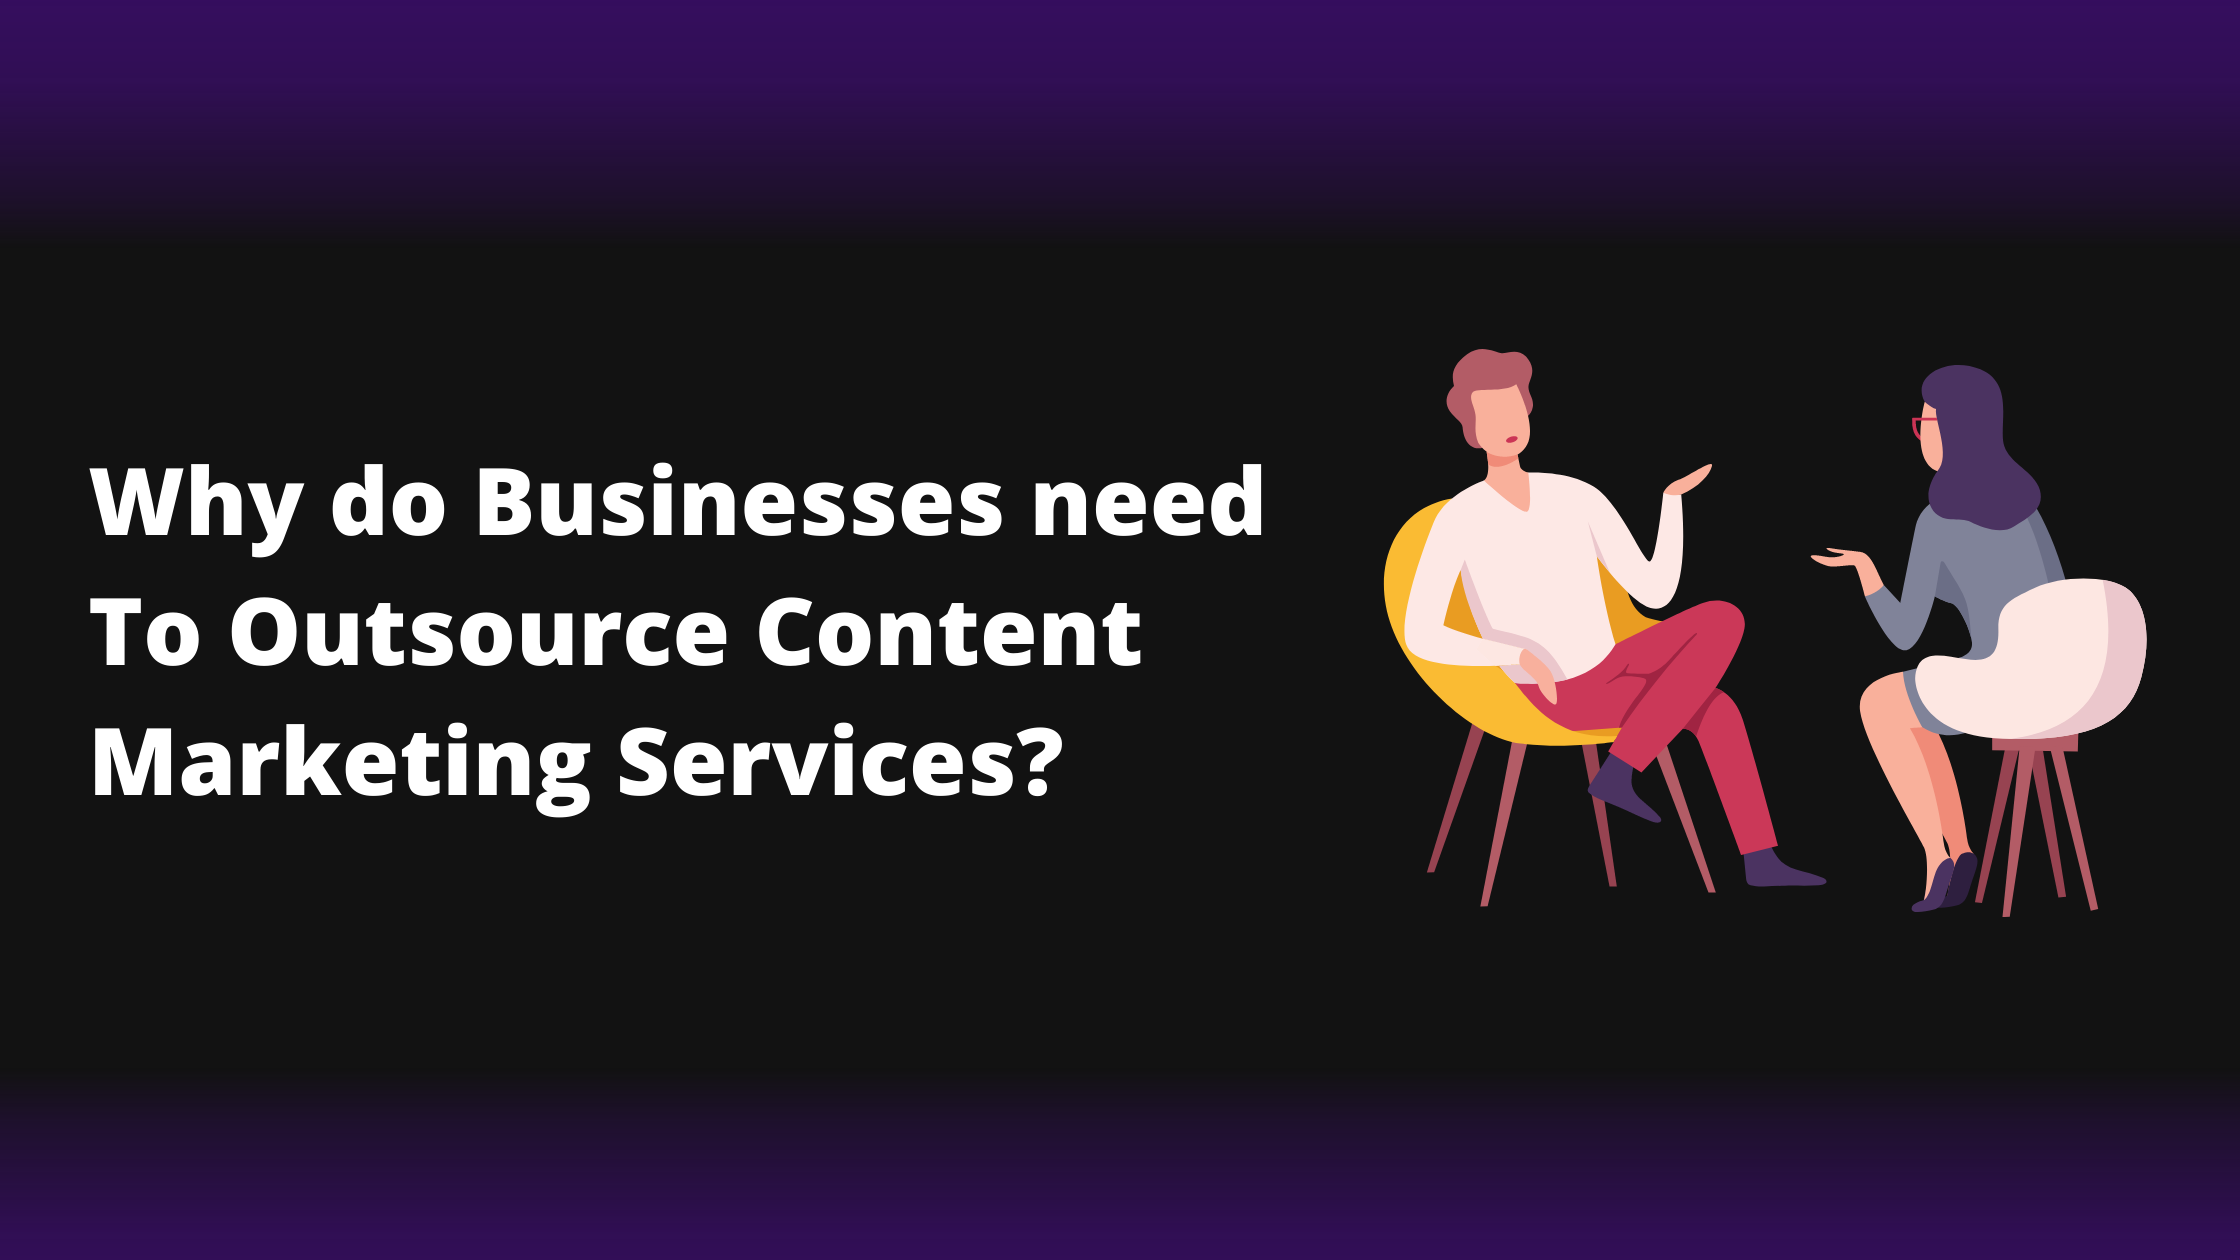 Why businesses need to outsource content marketing services?